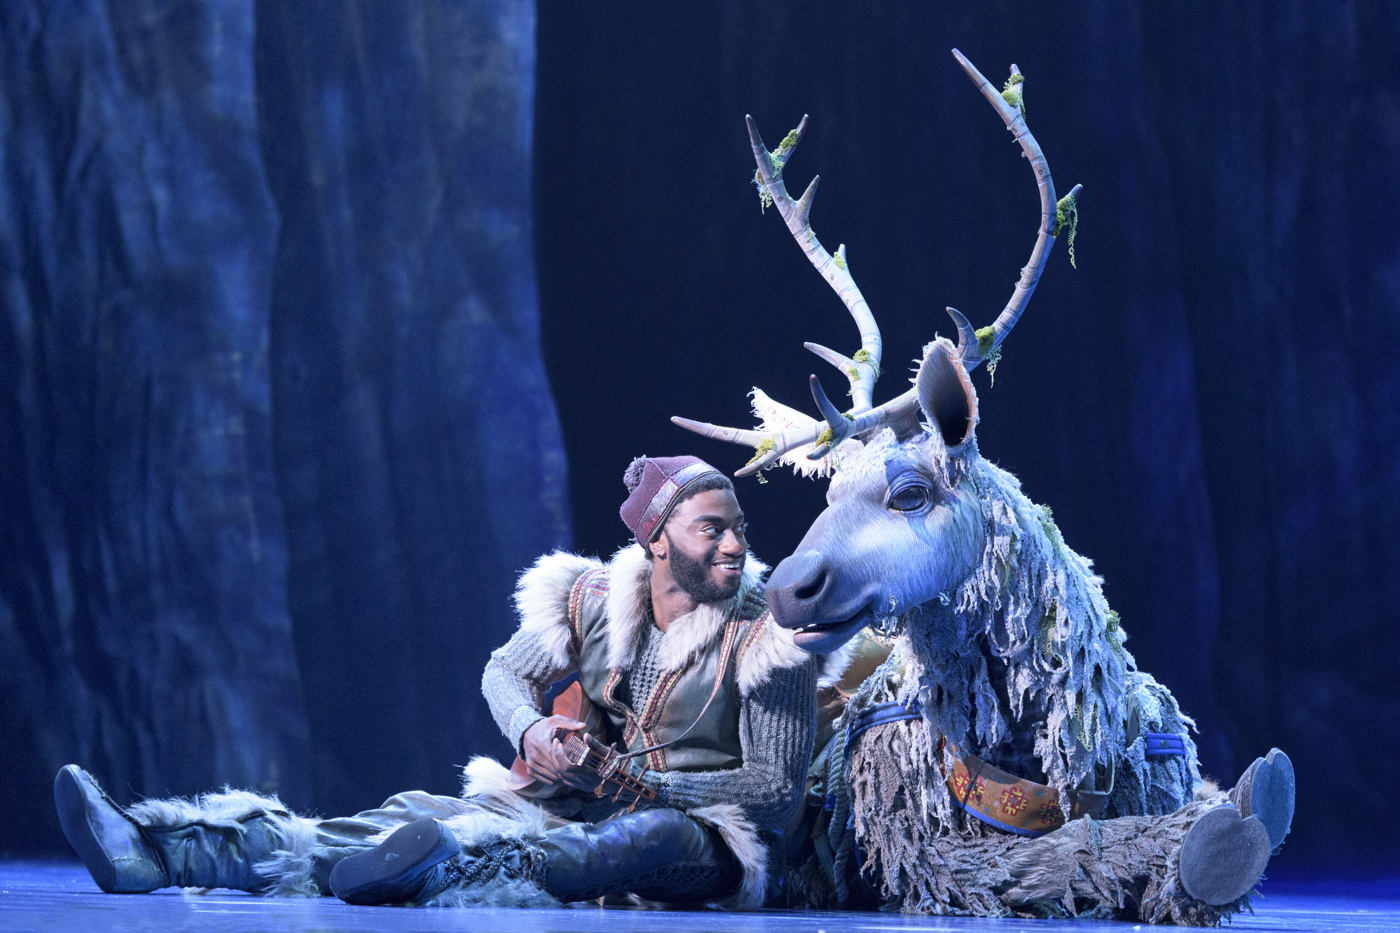 'Frozen' On Broadway Released a New Original Song and We're Obsessed